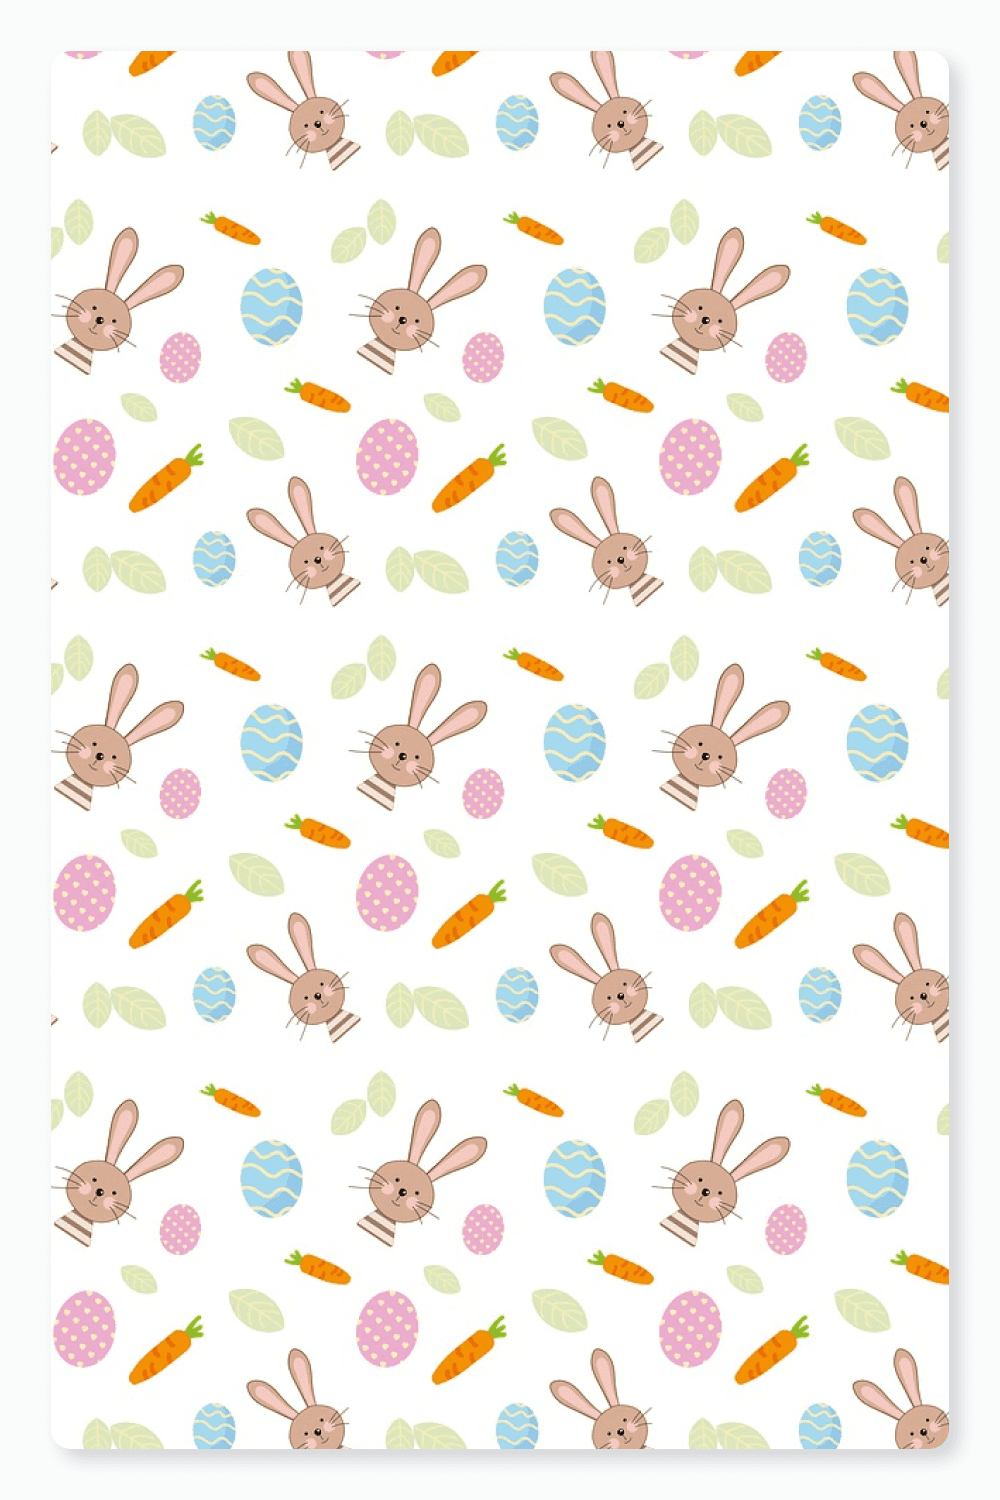 Patterns with the image of a rabbit, colorful eggs and carrots.